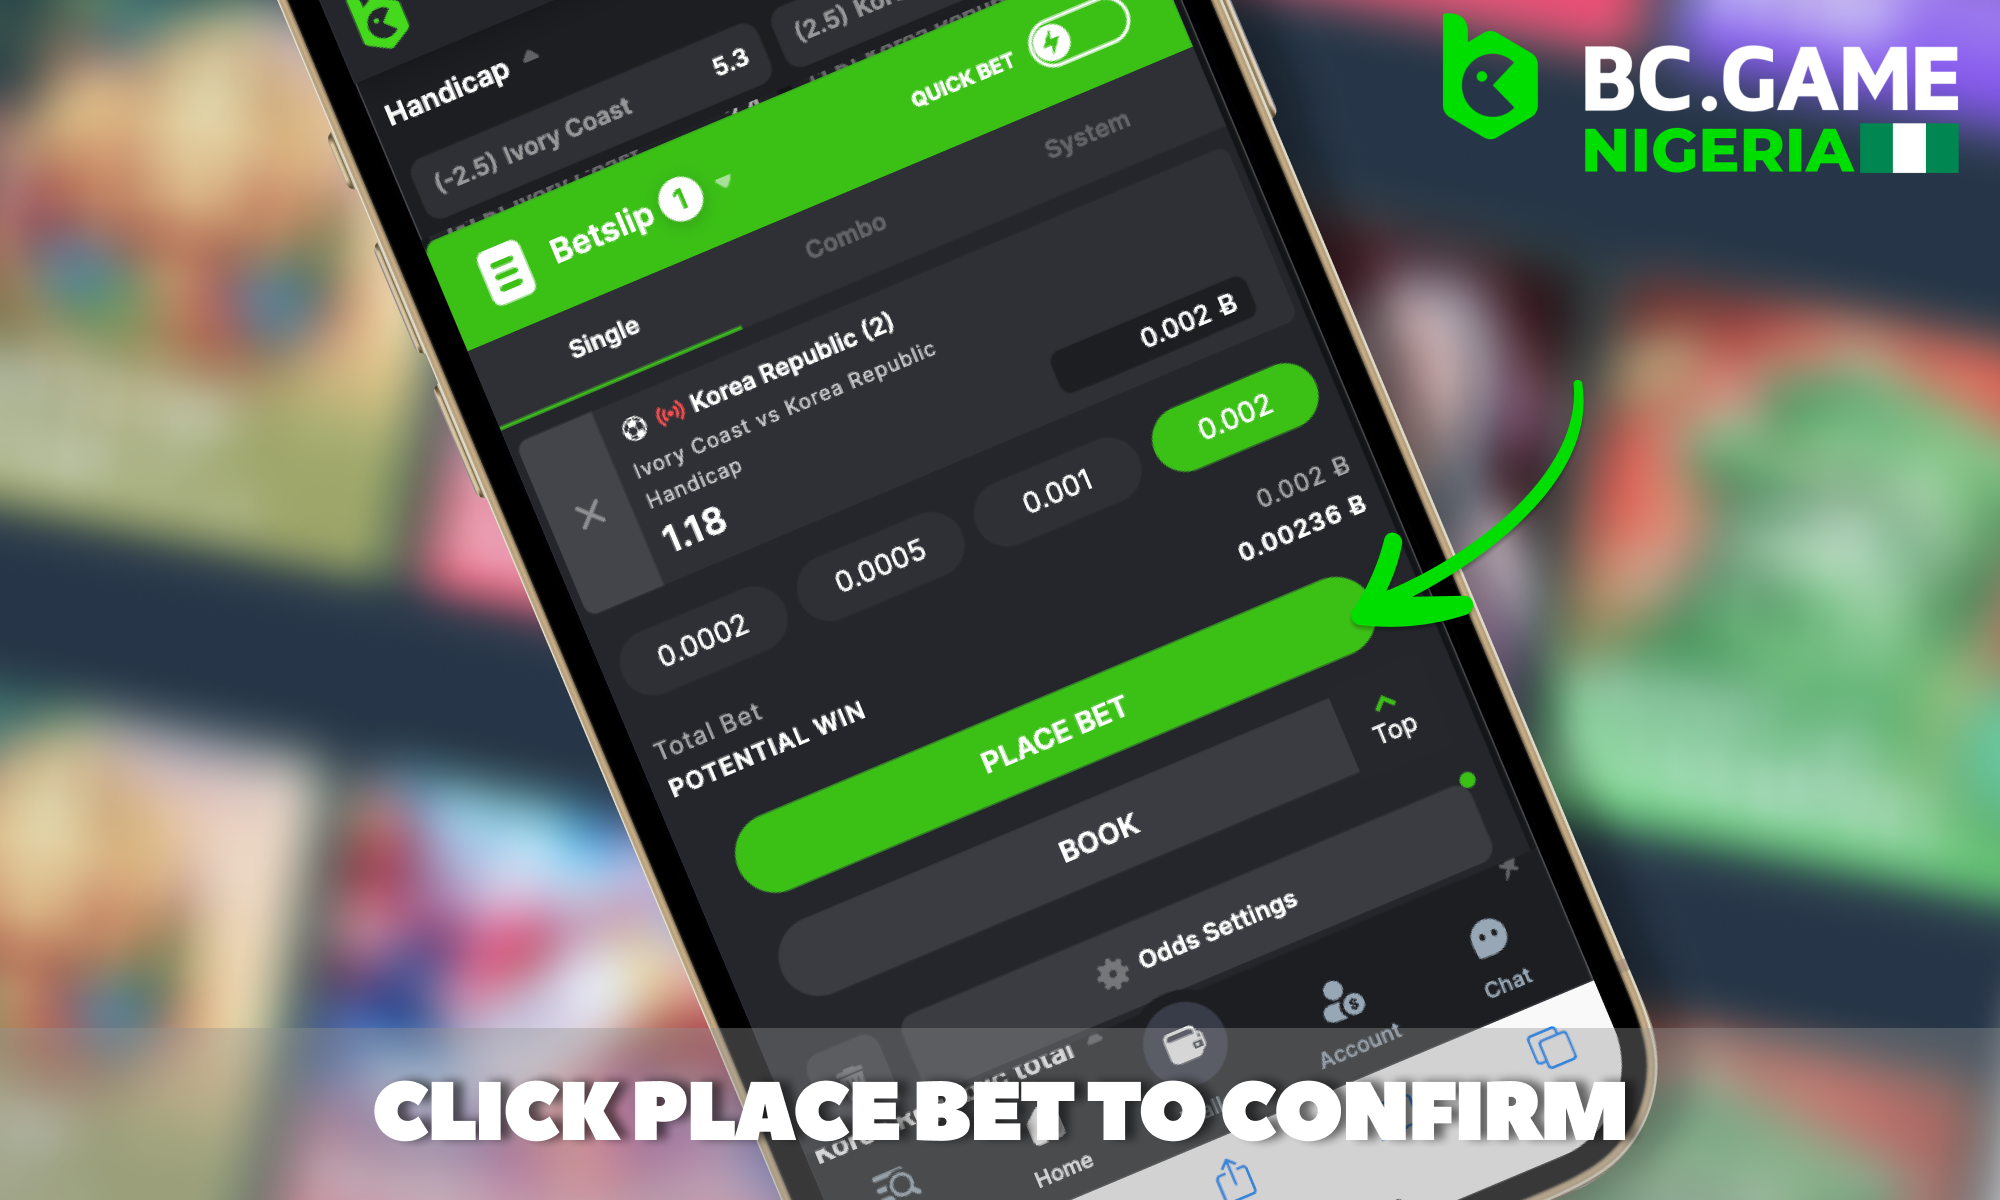 Confirm your bet at the BC Game Nigeria site